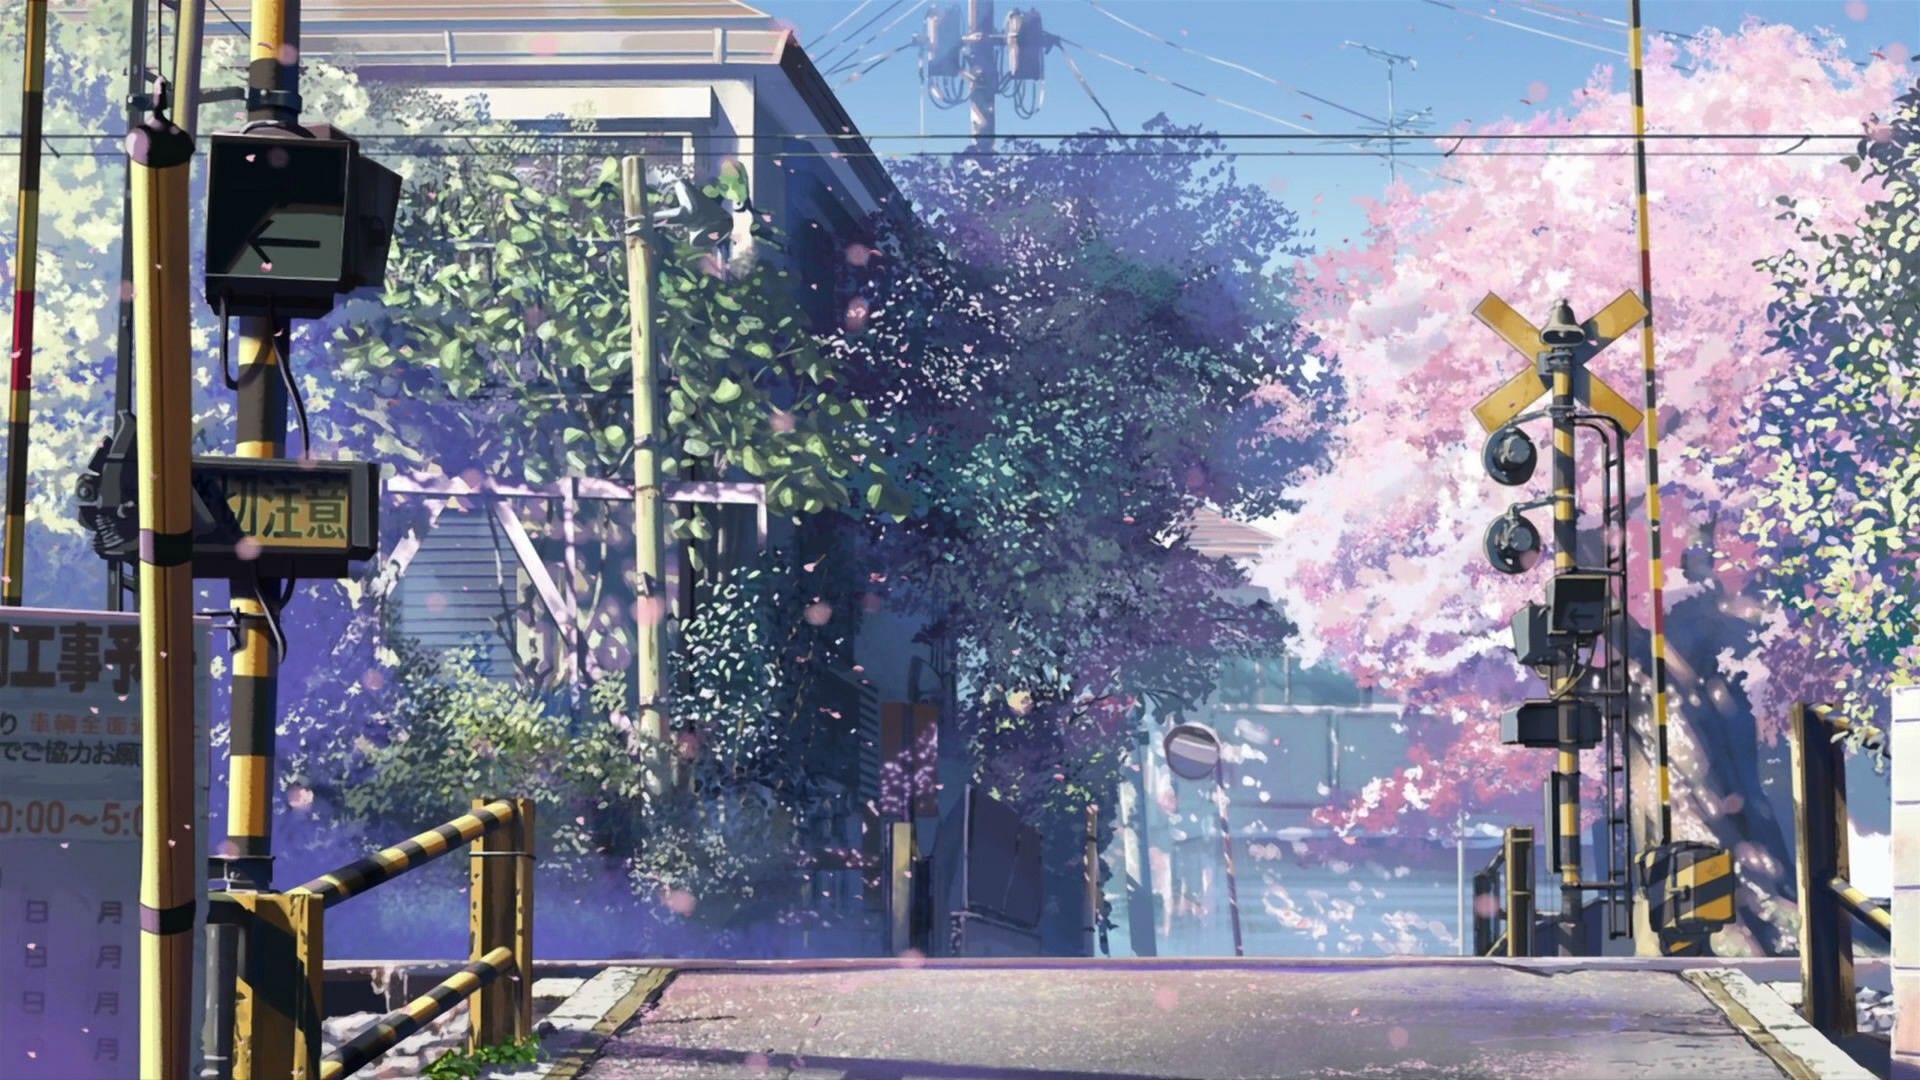 Town Scenery Anime Wallpaper Free Town Scenery Anime Background